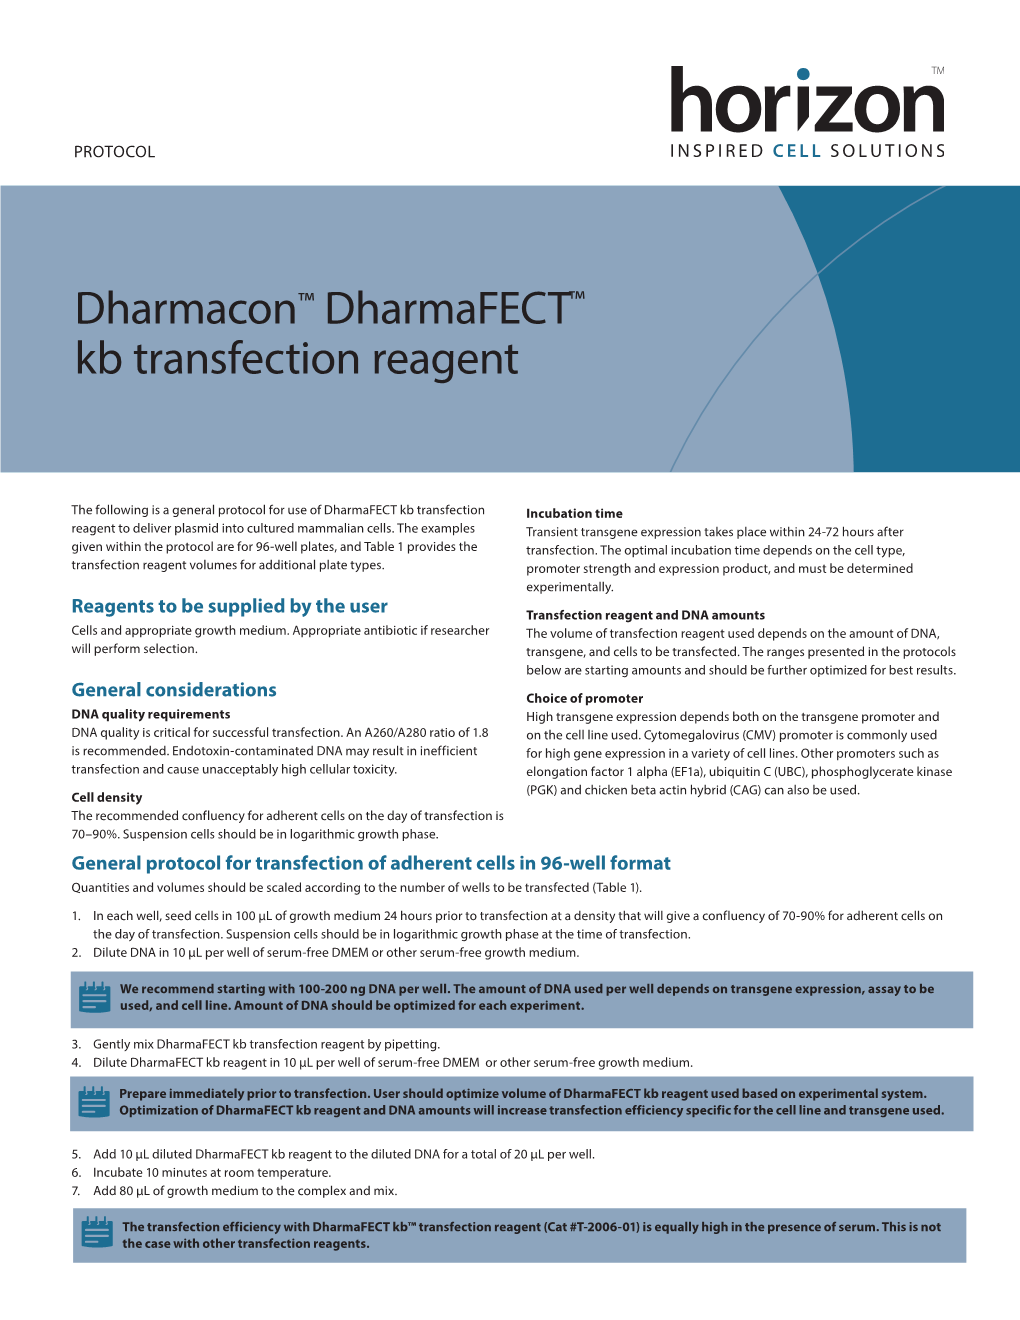 Dharmafect Kb Transfection Reagent by Pipetting